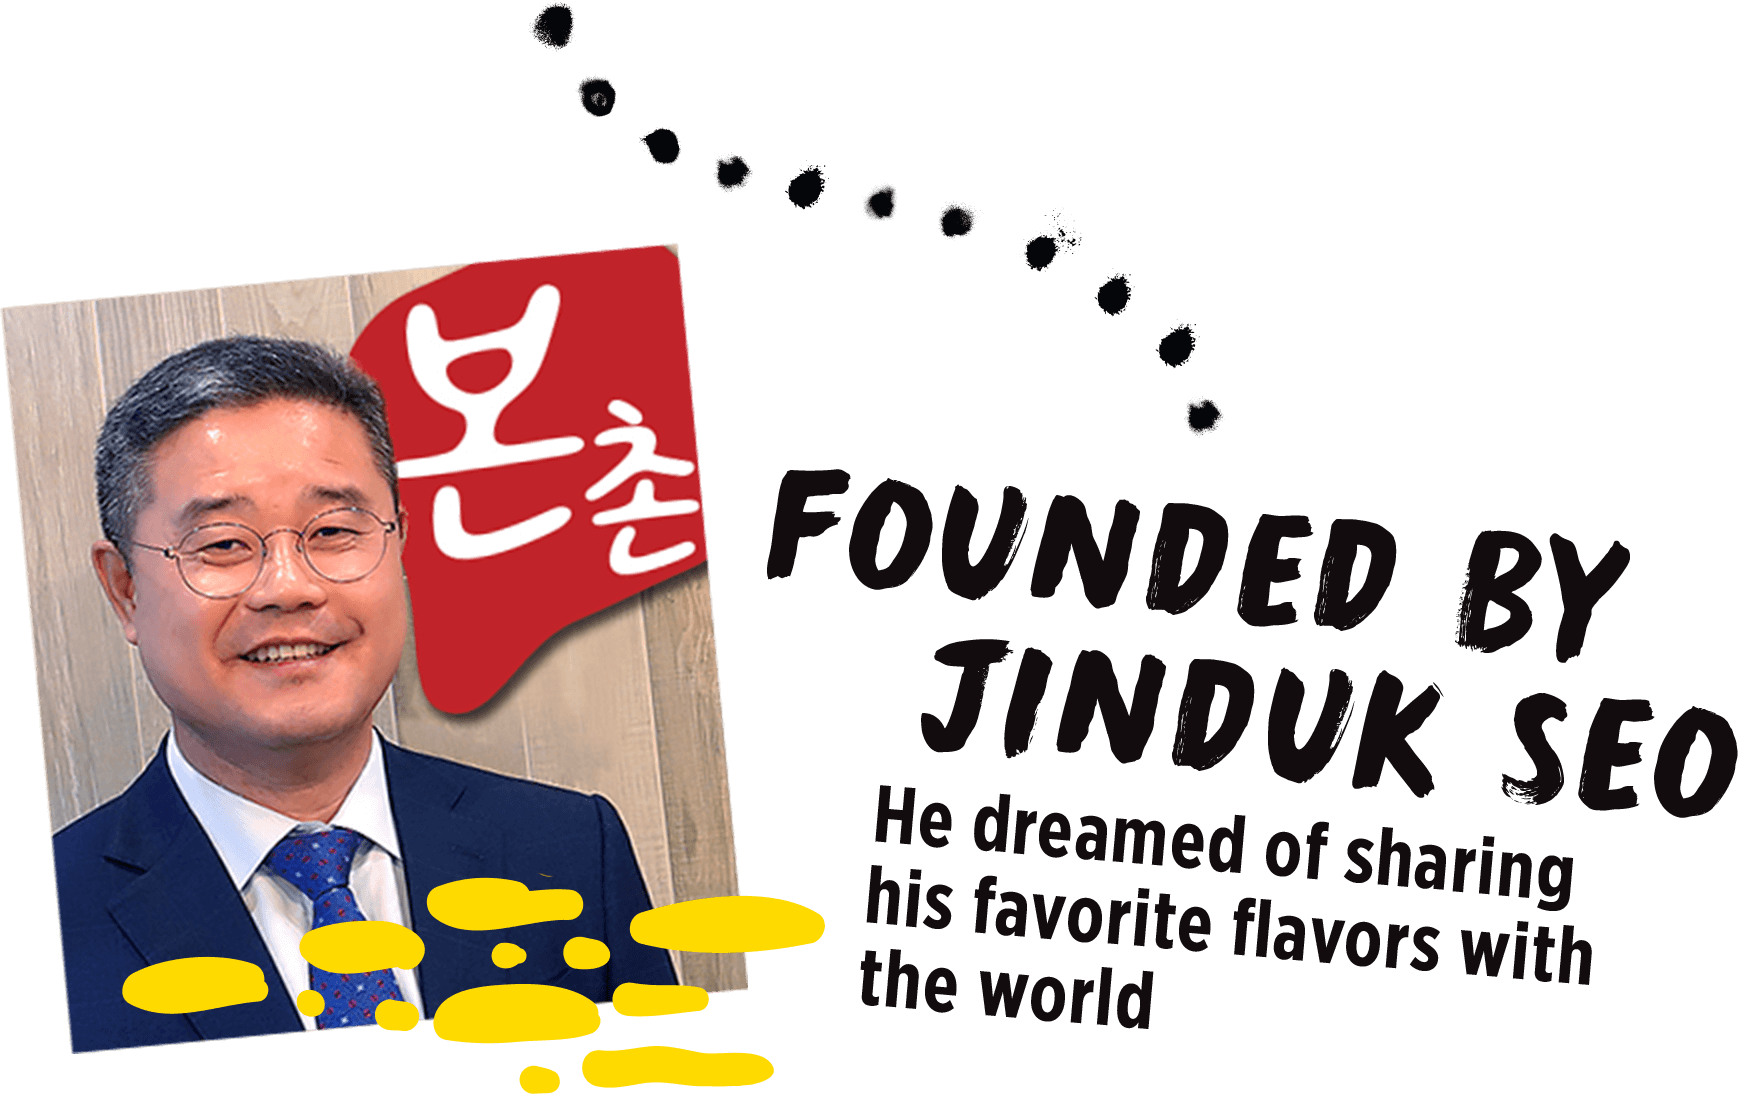 Founded by Jinduk Seo